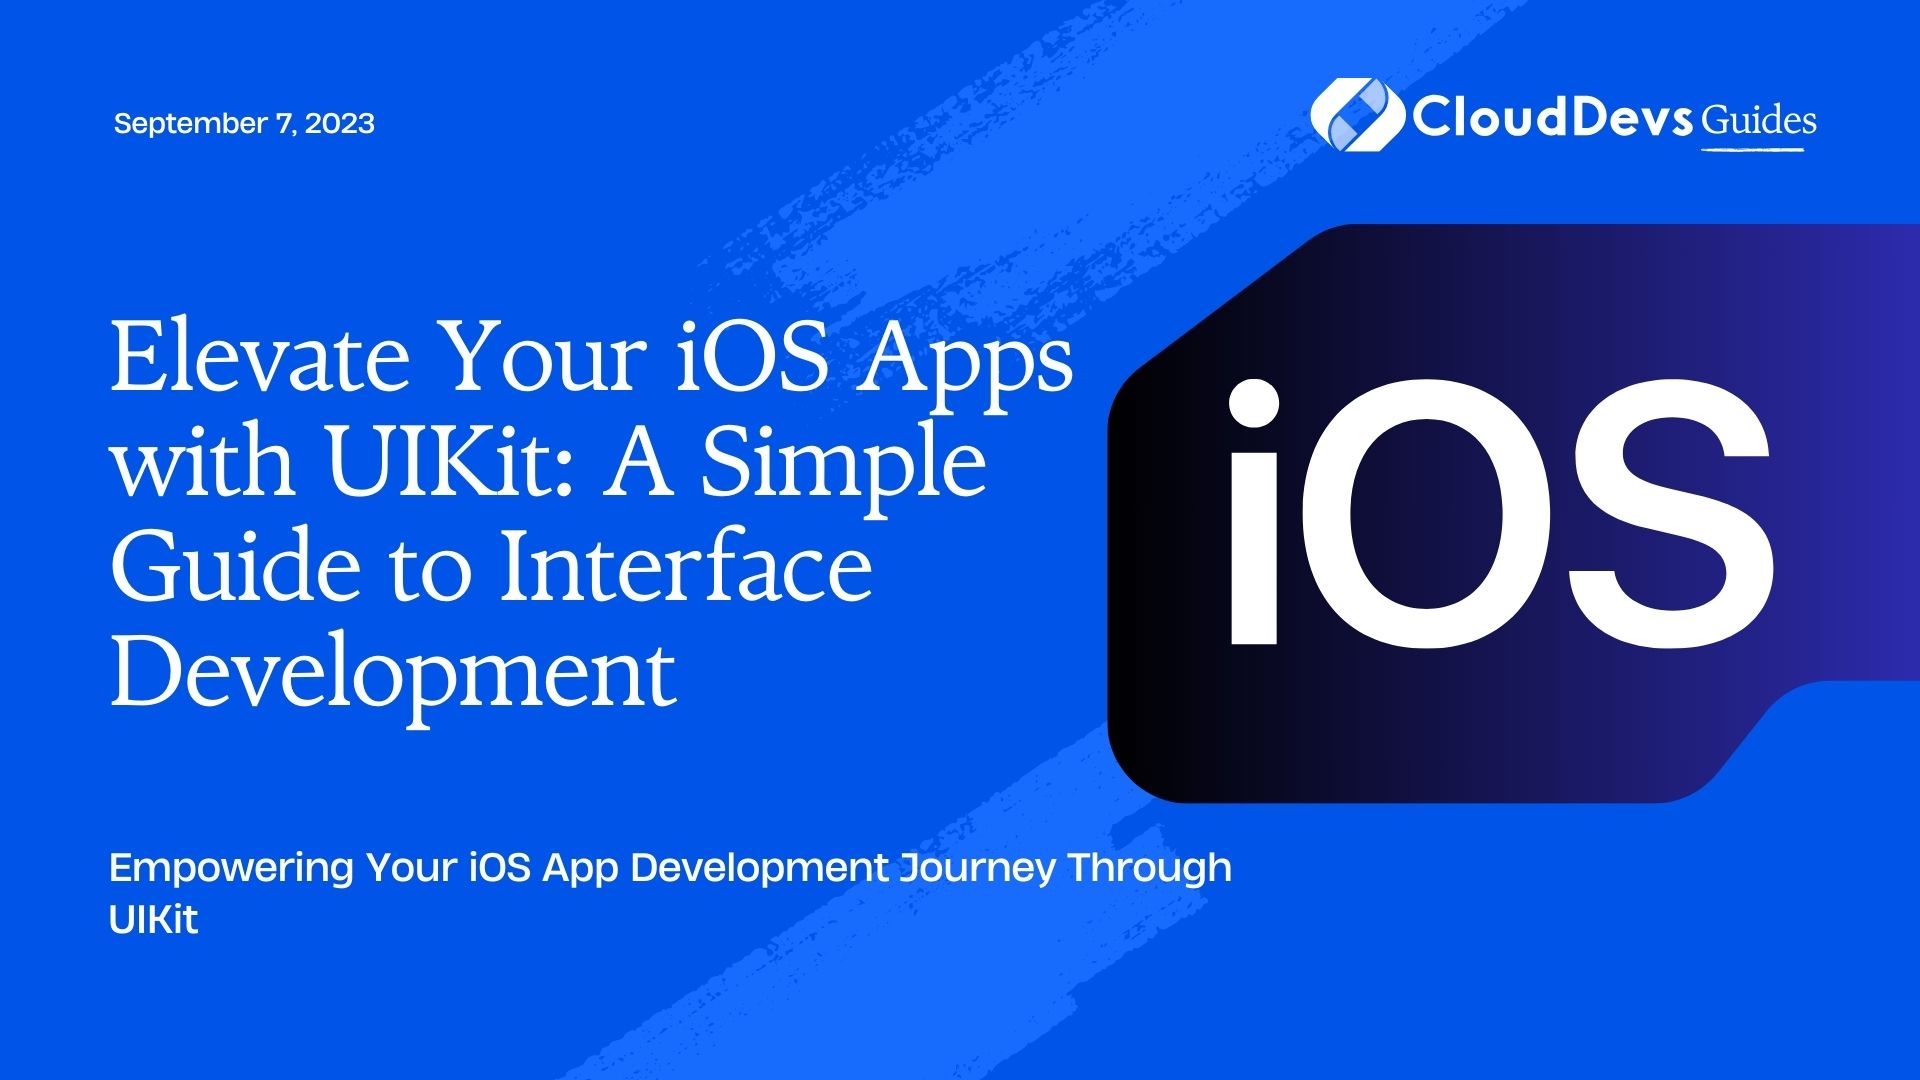 Elevate Your iOS Apps with UIKit: A Simple Guide to Interface Development